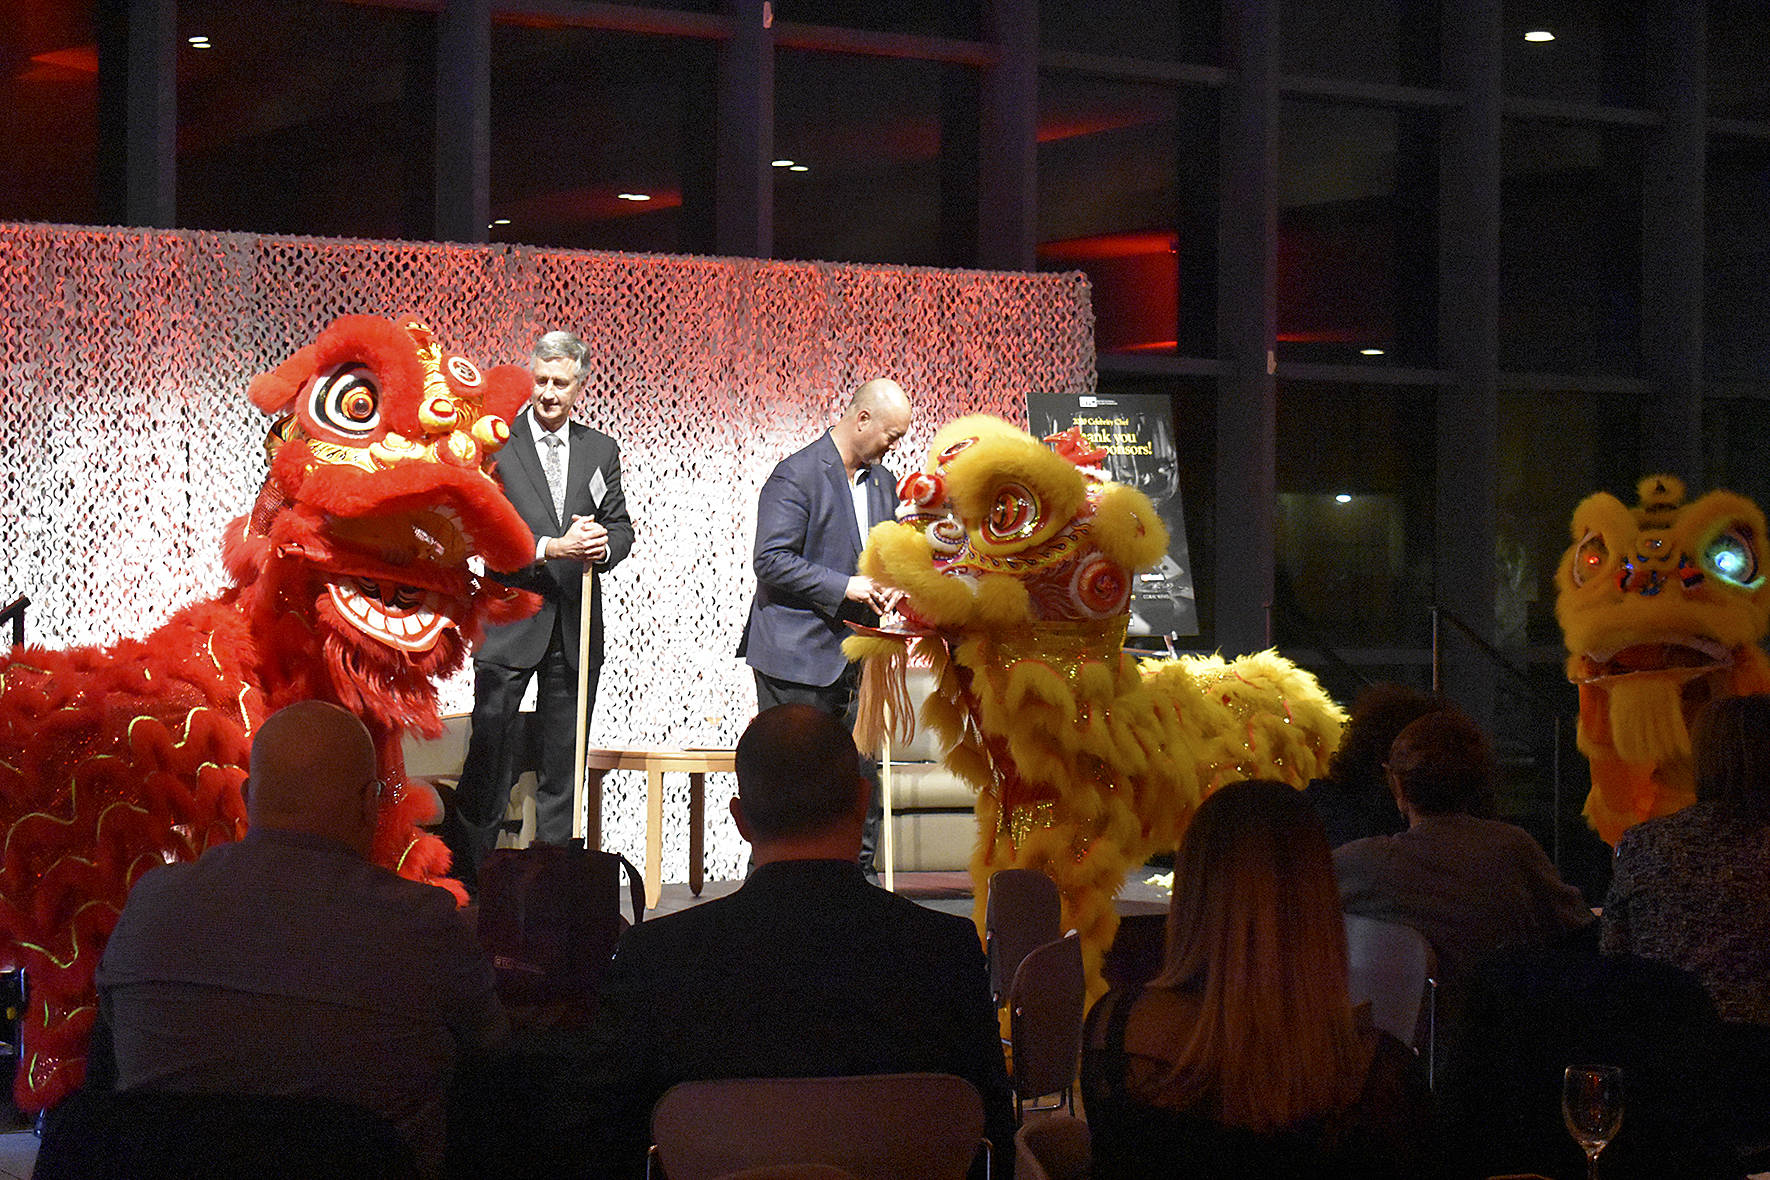 Photo by Haley Ausbun. The International Lion Dance & Martial Arts Team performed in honor of Lunar New Year at the event, Jan. 28 at Renton Technical College 2020 Celebrity Chef event. RTC President Kevin McCarthy and Advanced Sommelier Christopher Chan participated in the demonstration, offering heads of lettuce to the lions. The Lion Dance is meant to bring good luck.